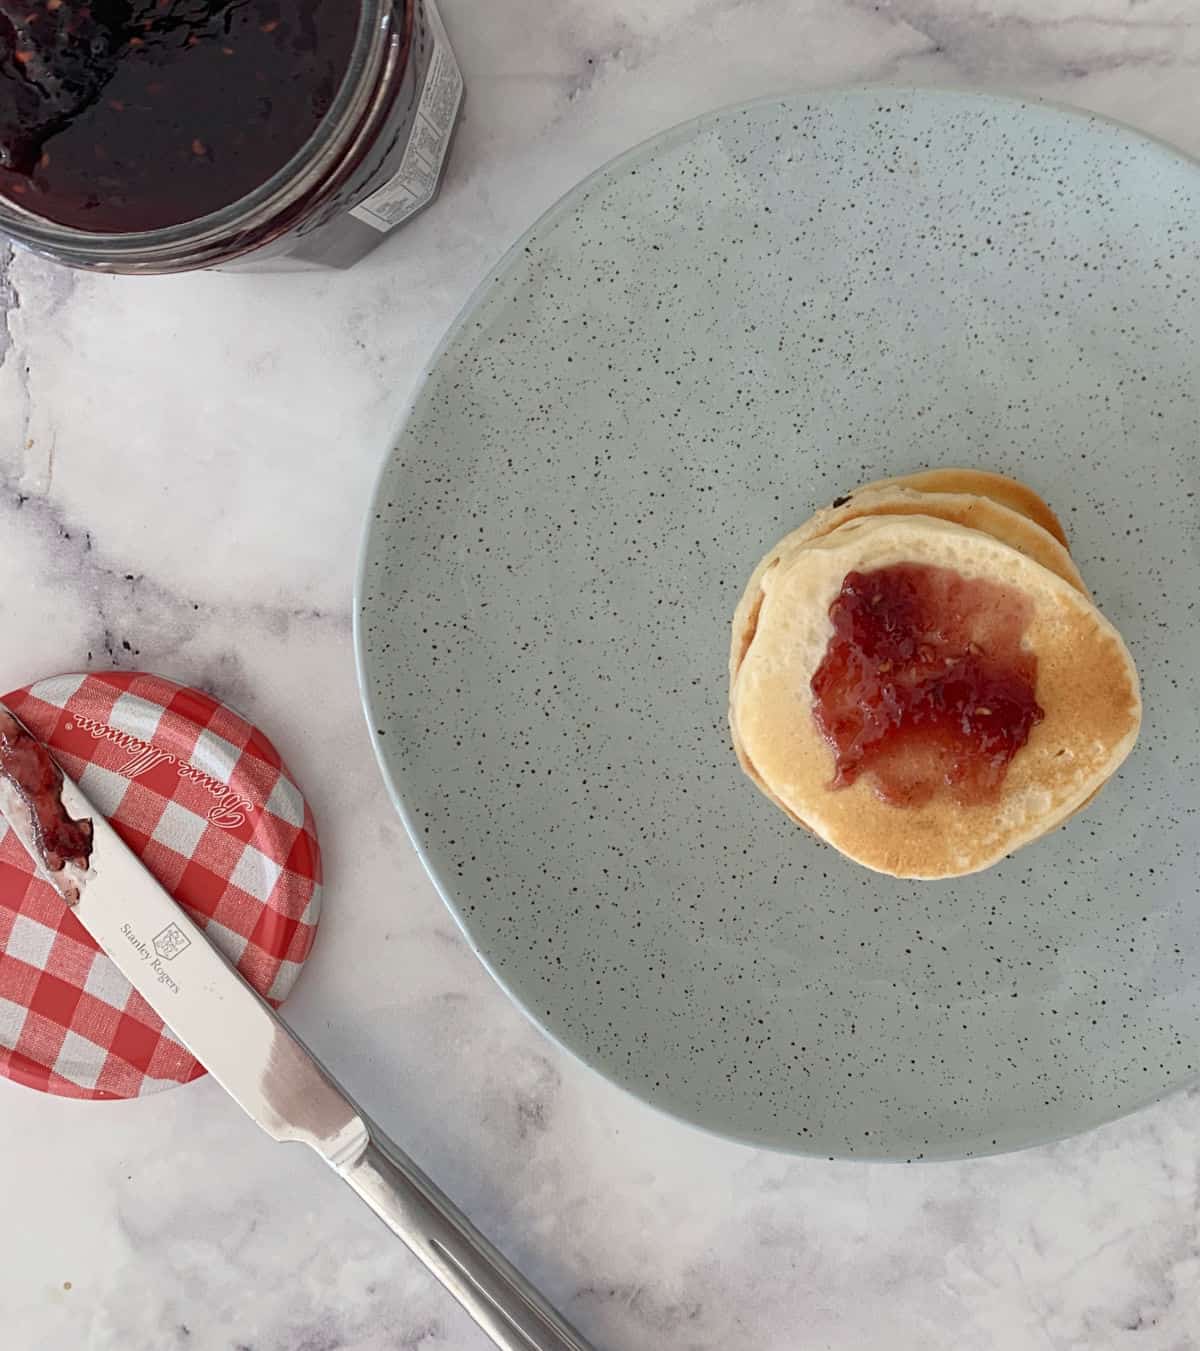 Pikelets topped with raspberry jam sitting on a greens speckled plate.